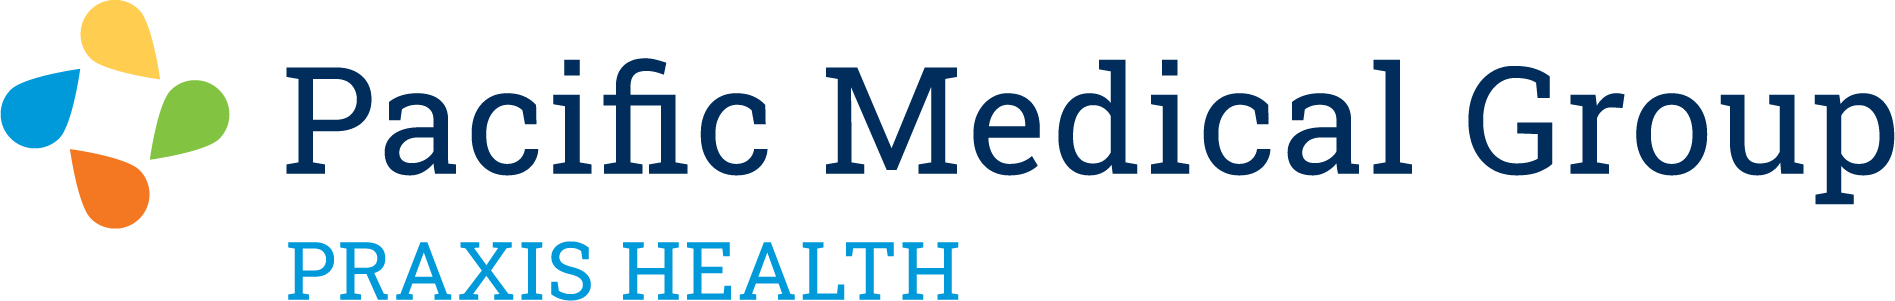 Pacific Medical Group Logo